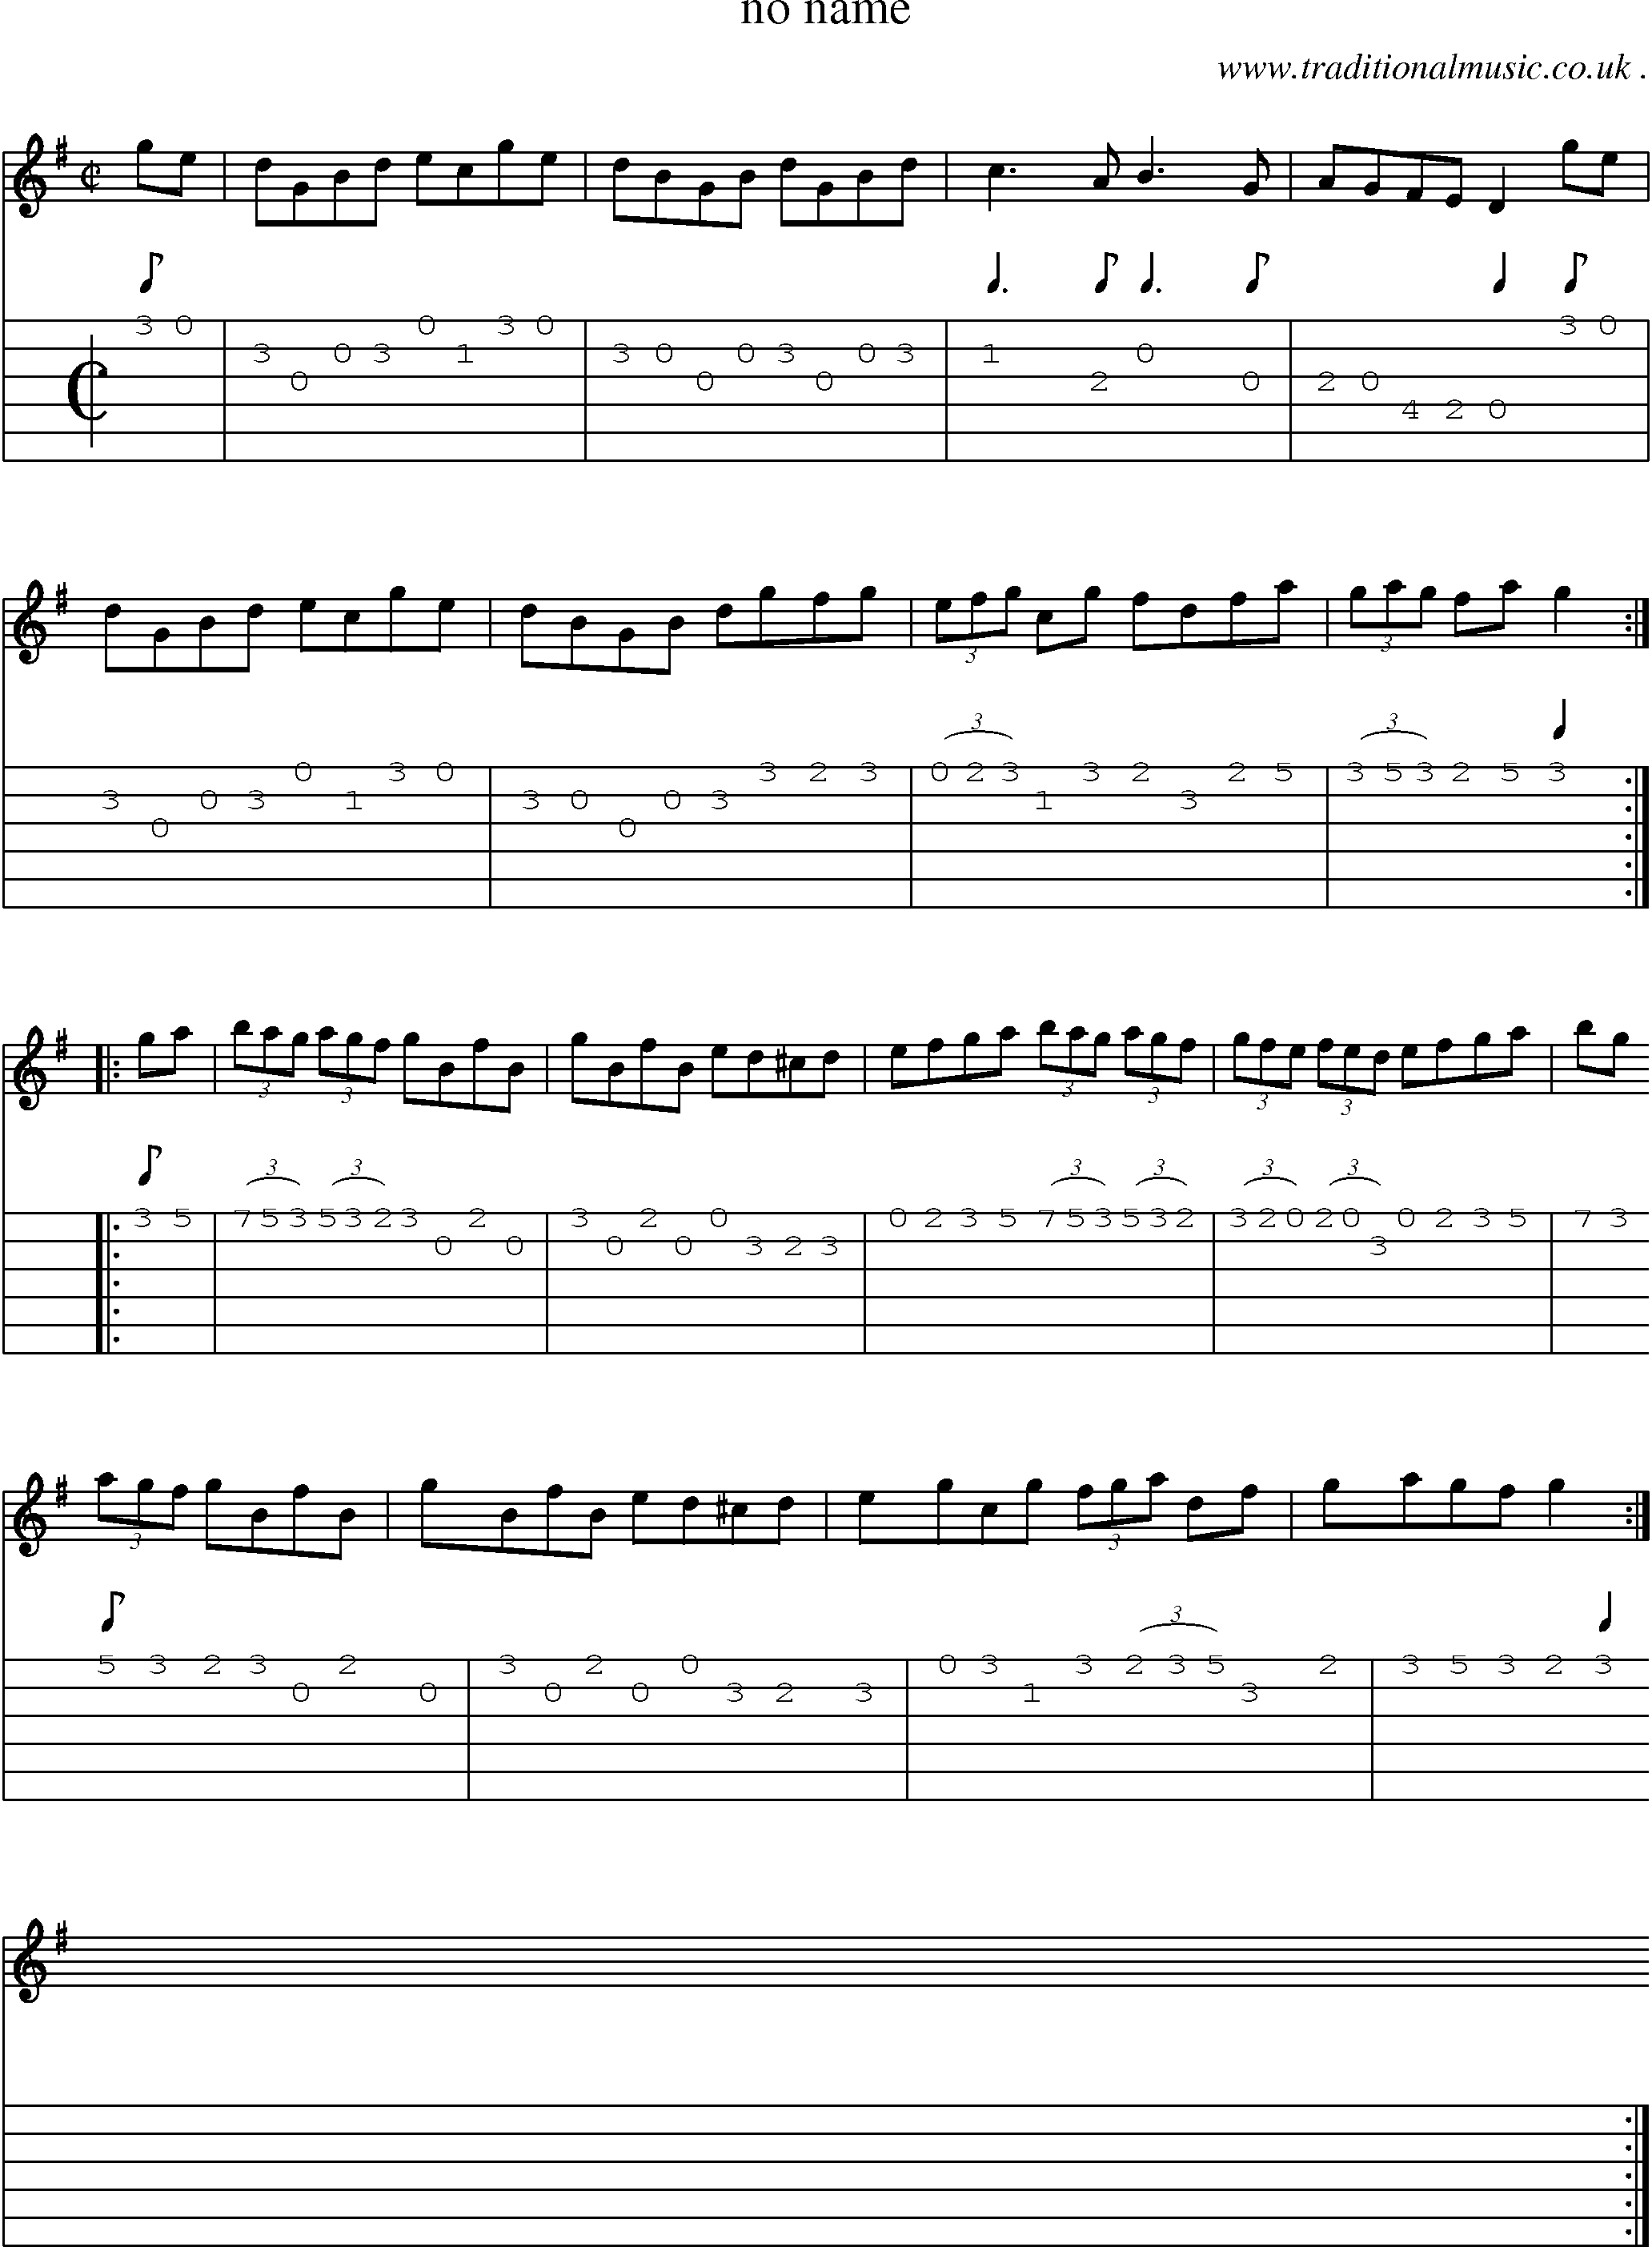 Sheet-Music and Guitar Tabs for No Name